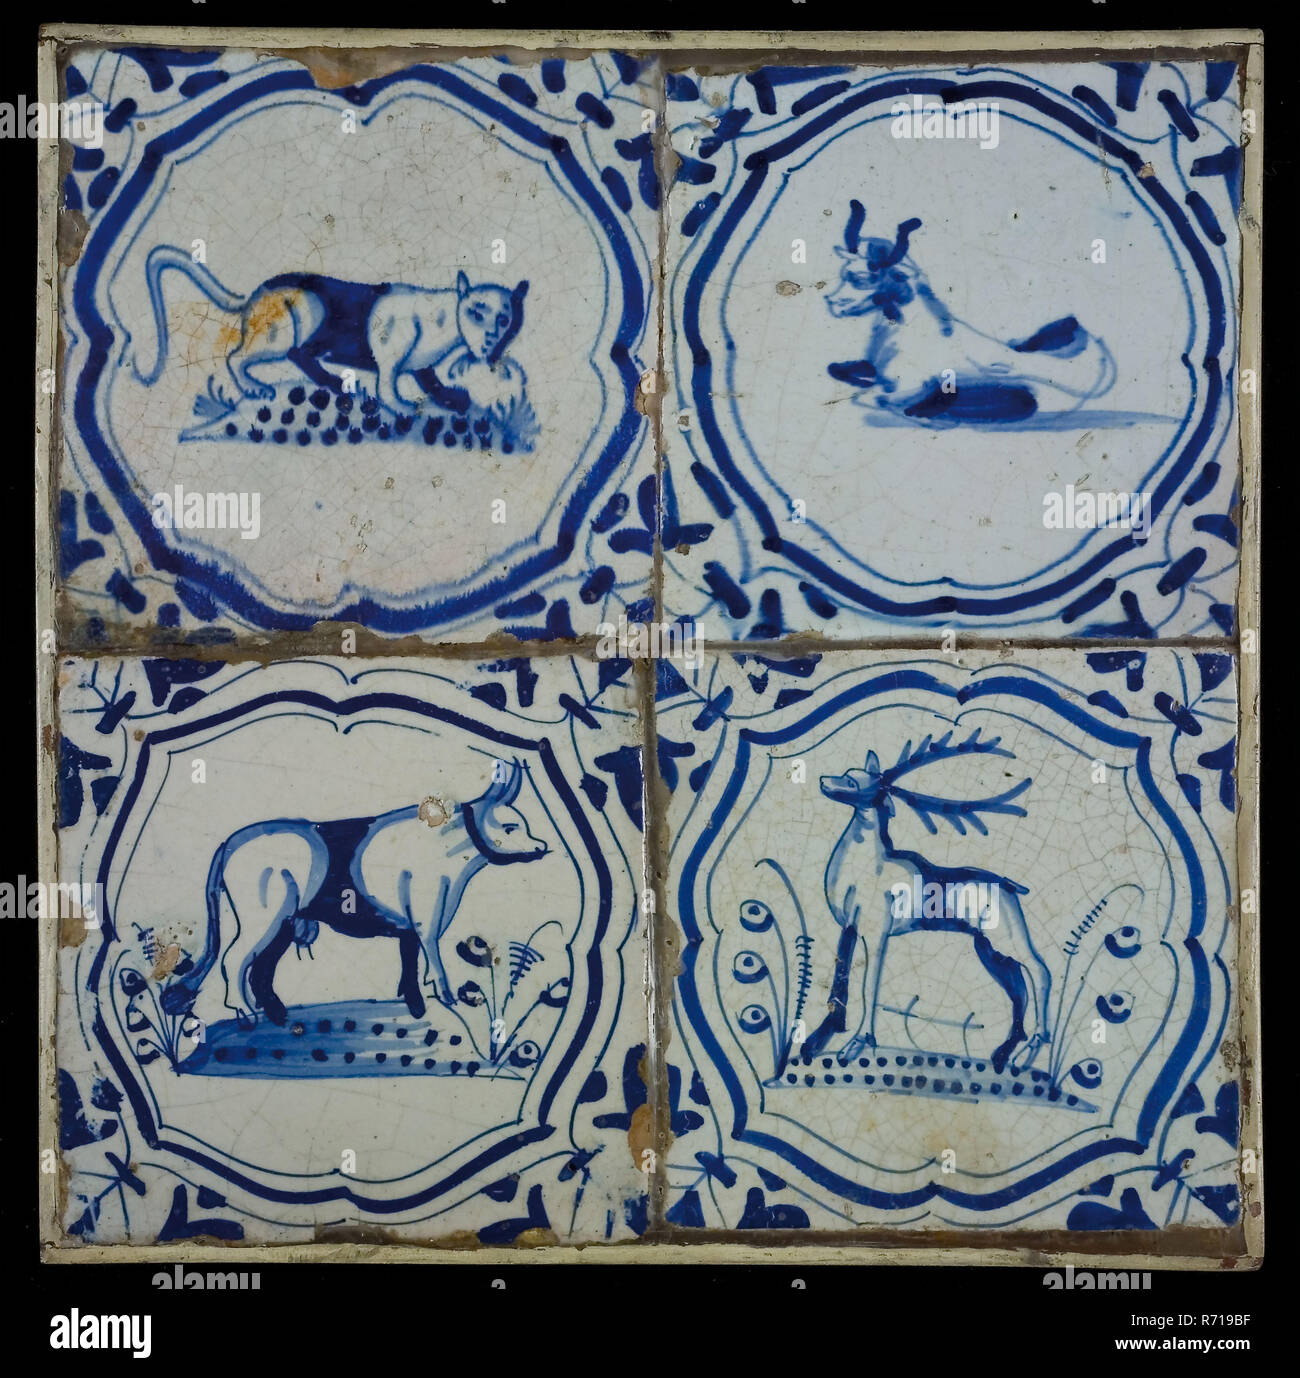 Square tile field, four tiles, animal decor, blue on white, cat-like, two cows and deer, in accolade, corner motif, tiled field wall tile tile sculpture ceramic earthenware glaze tin glazing, baked 2x glazed painted Stock Photo